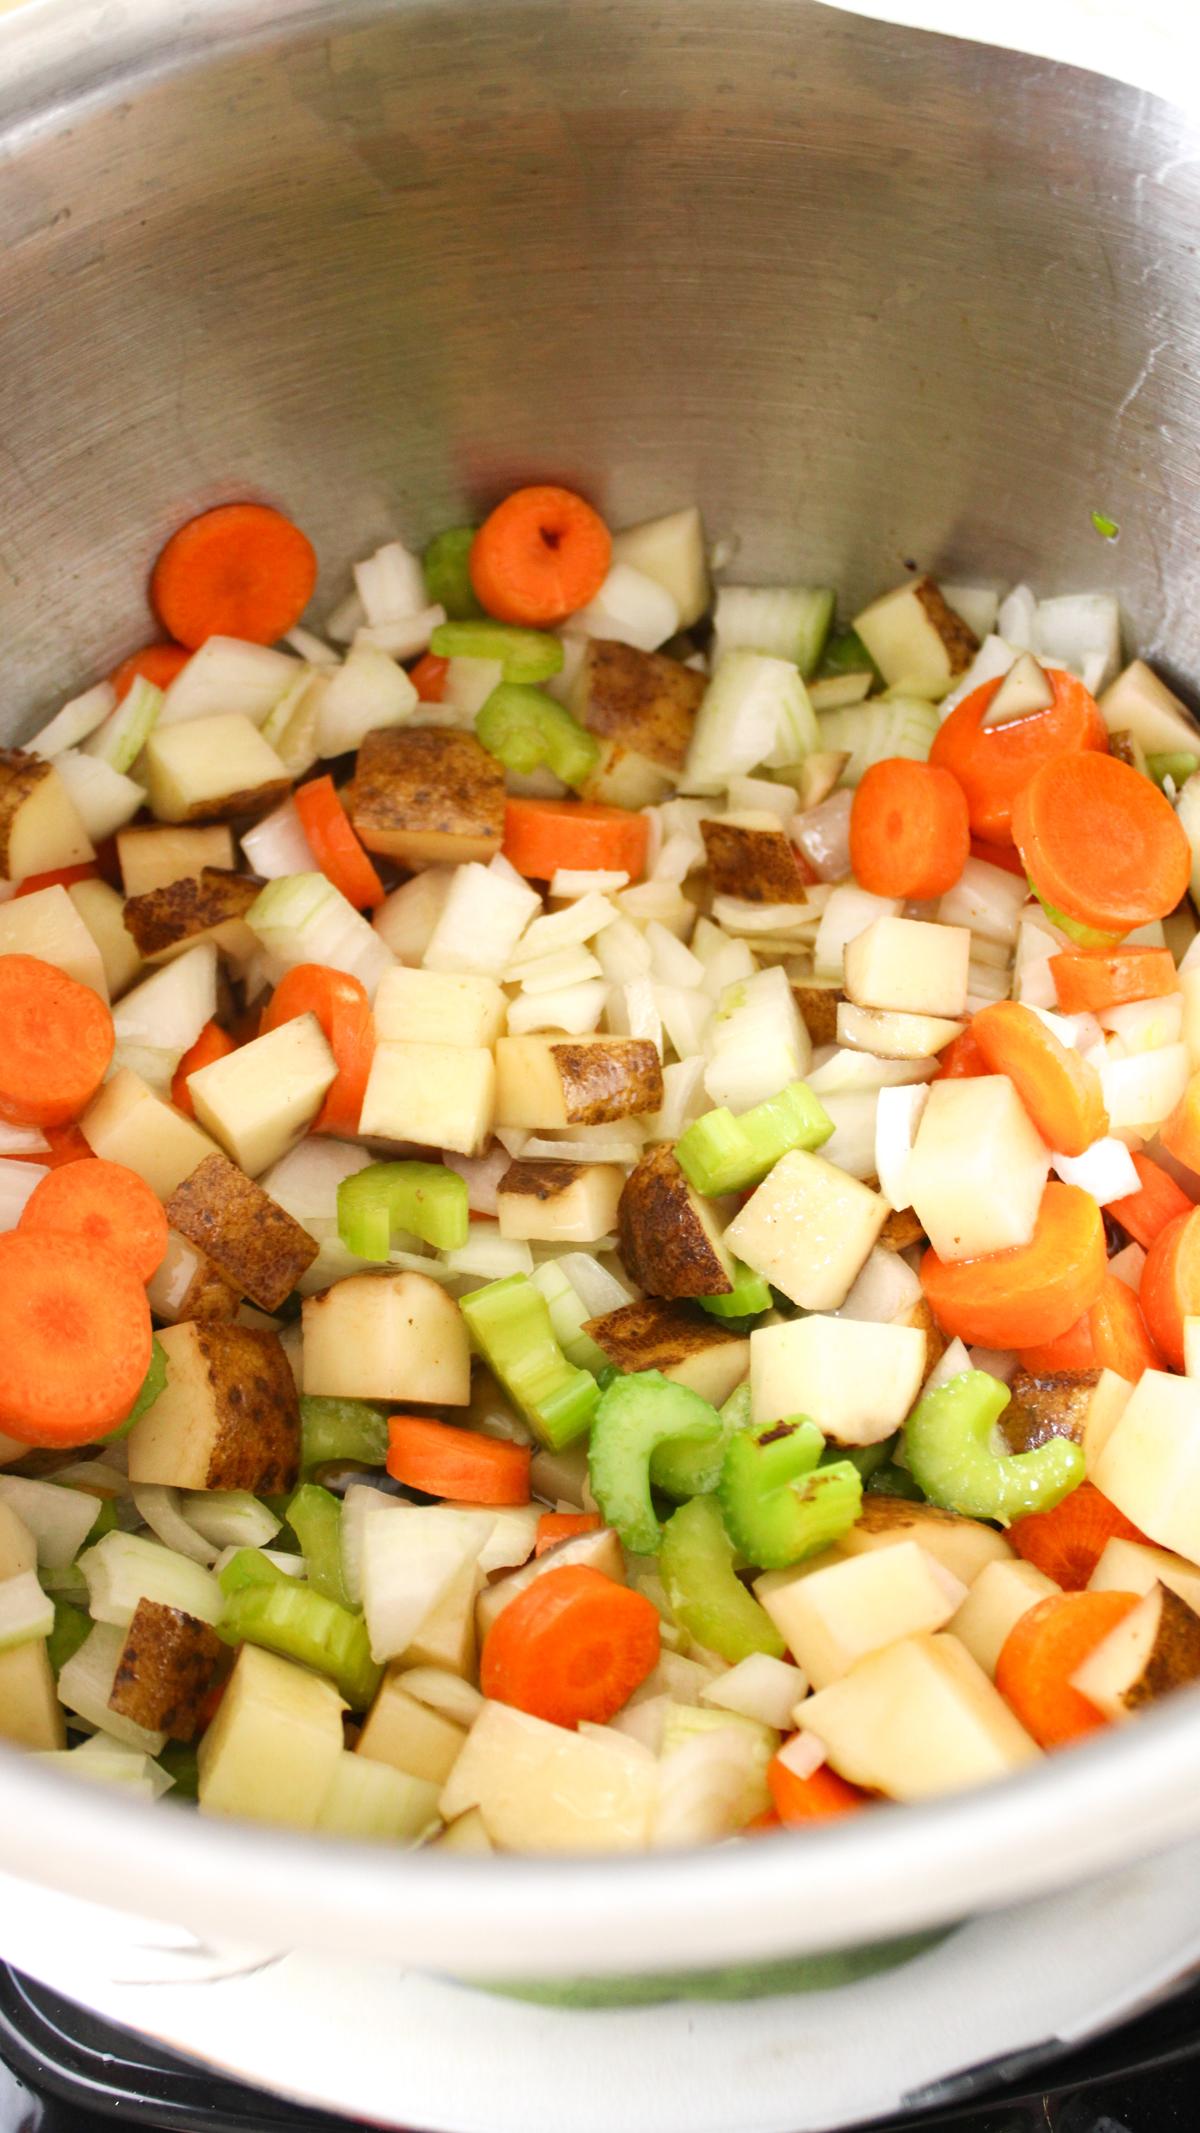 Veggies added to stock pot to cook.